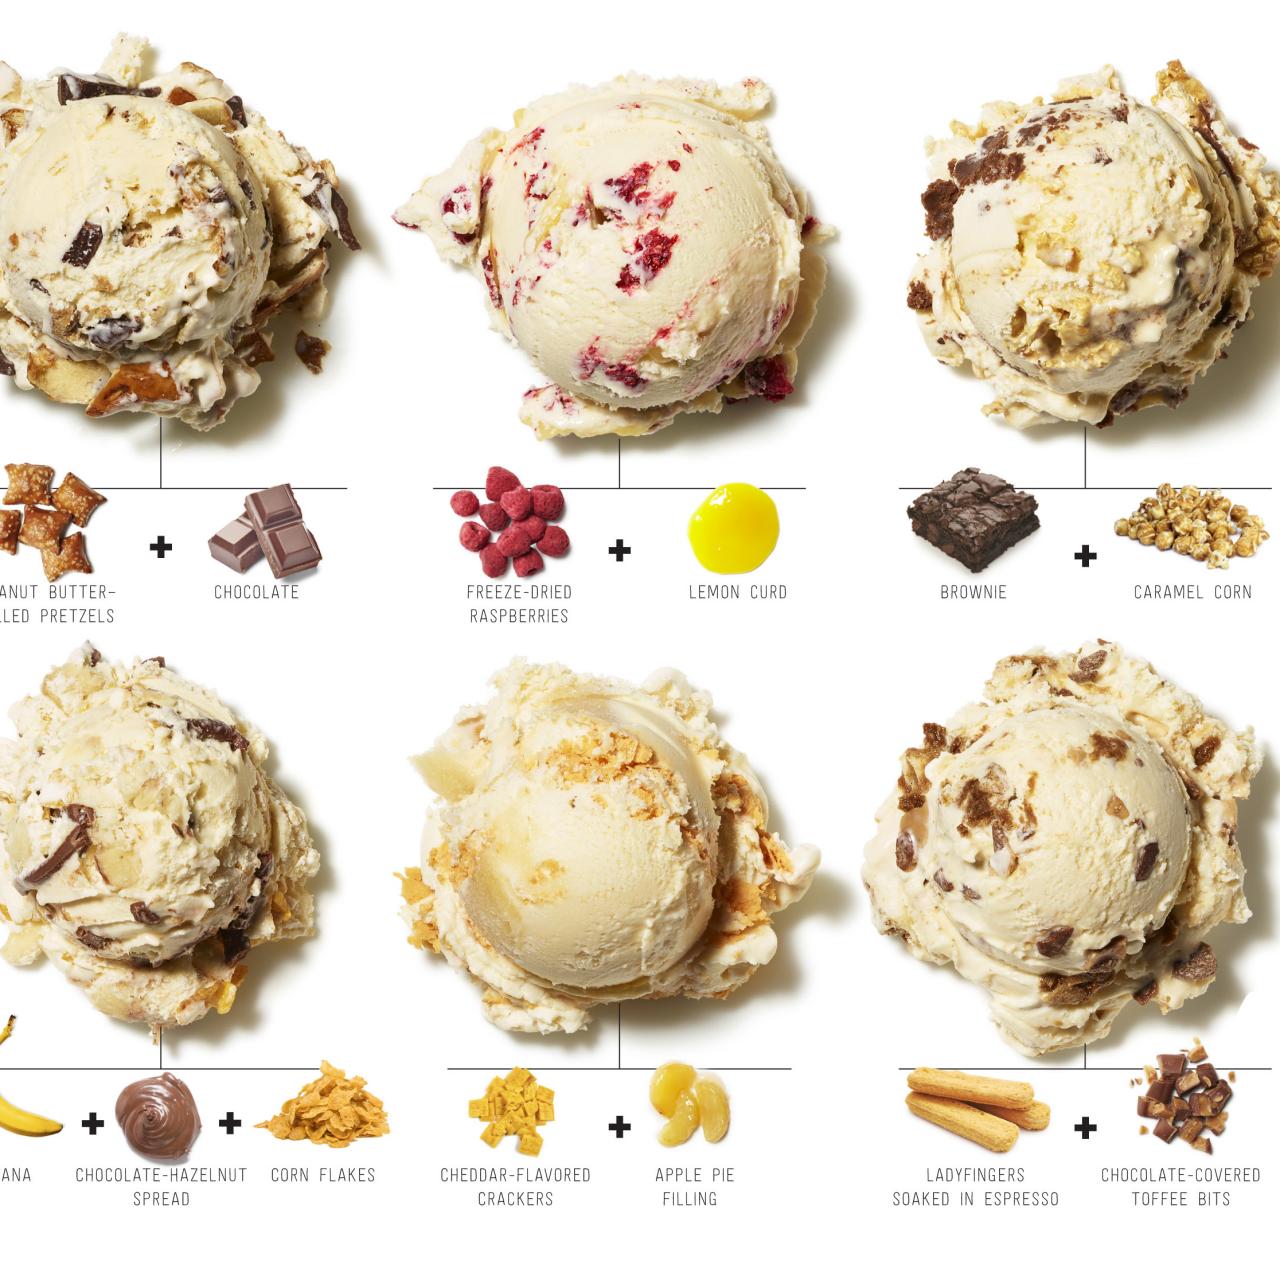 Popular ice cream flavors: how fruit can become the newest star